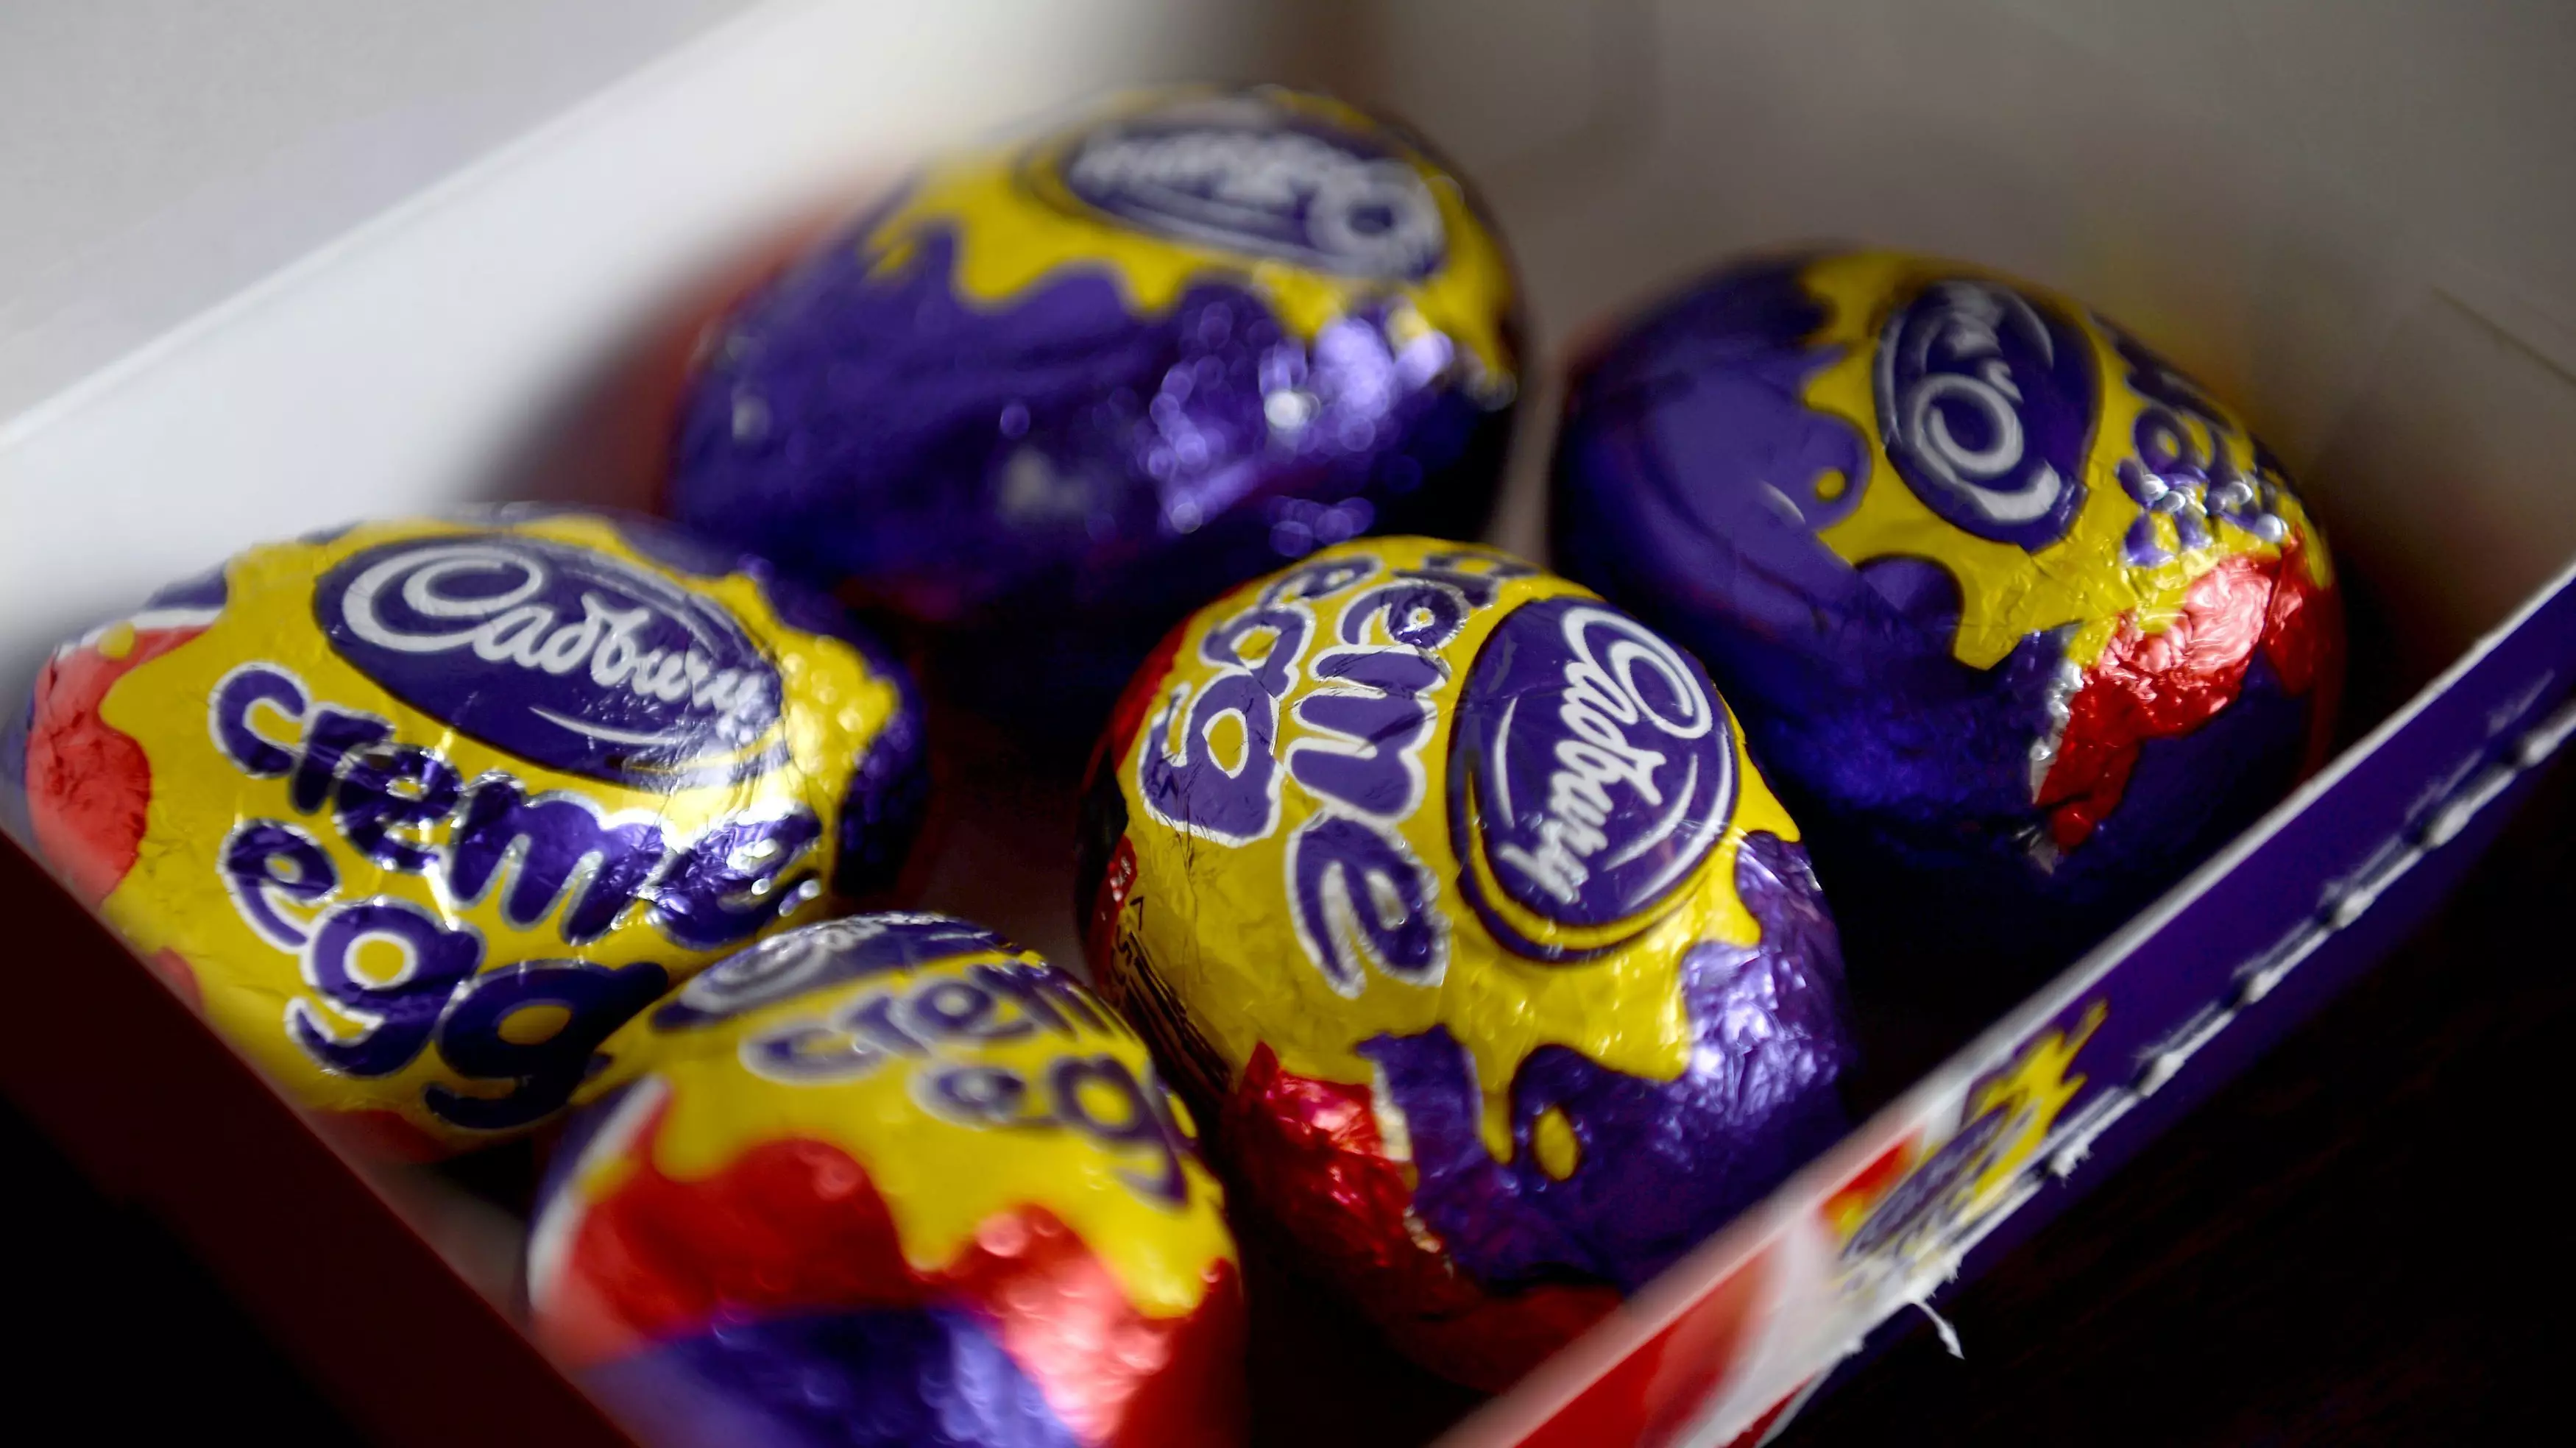 Three Types Of Creme Egg Ice Cream Are On Sale For £1.50 